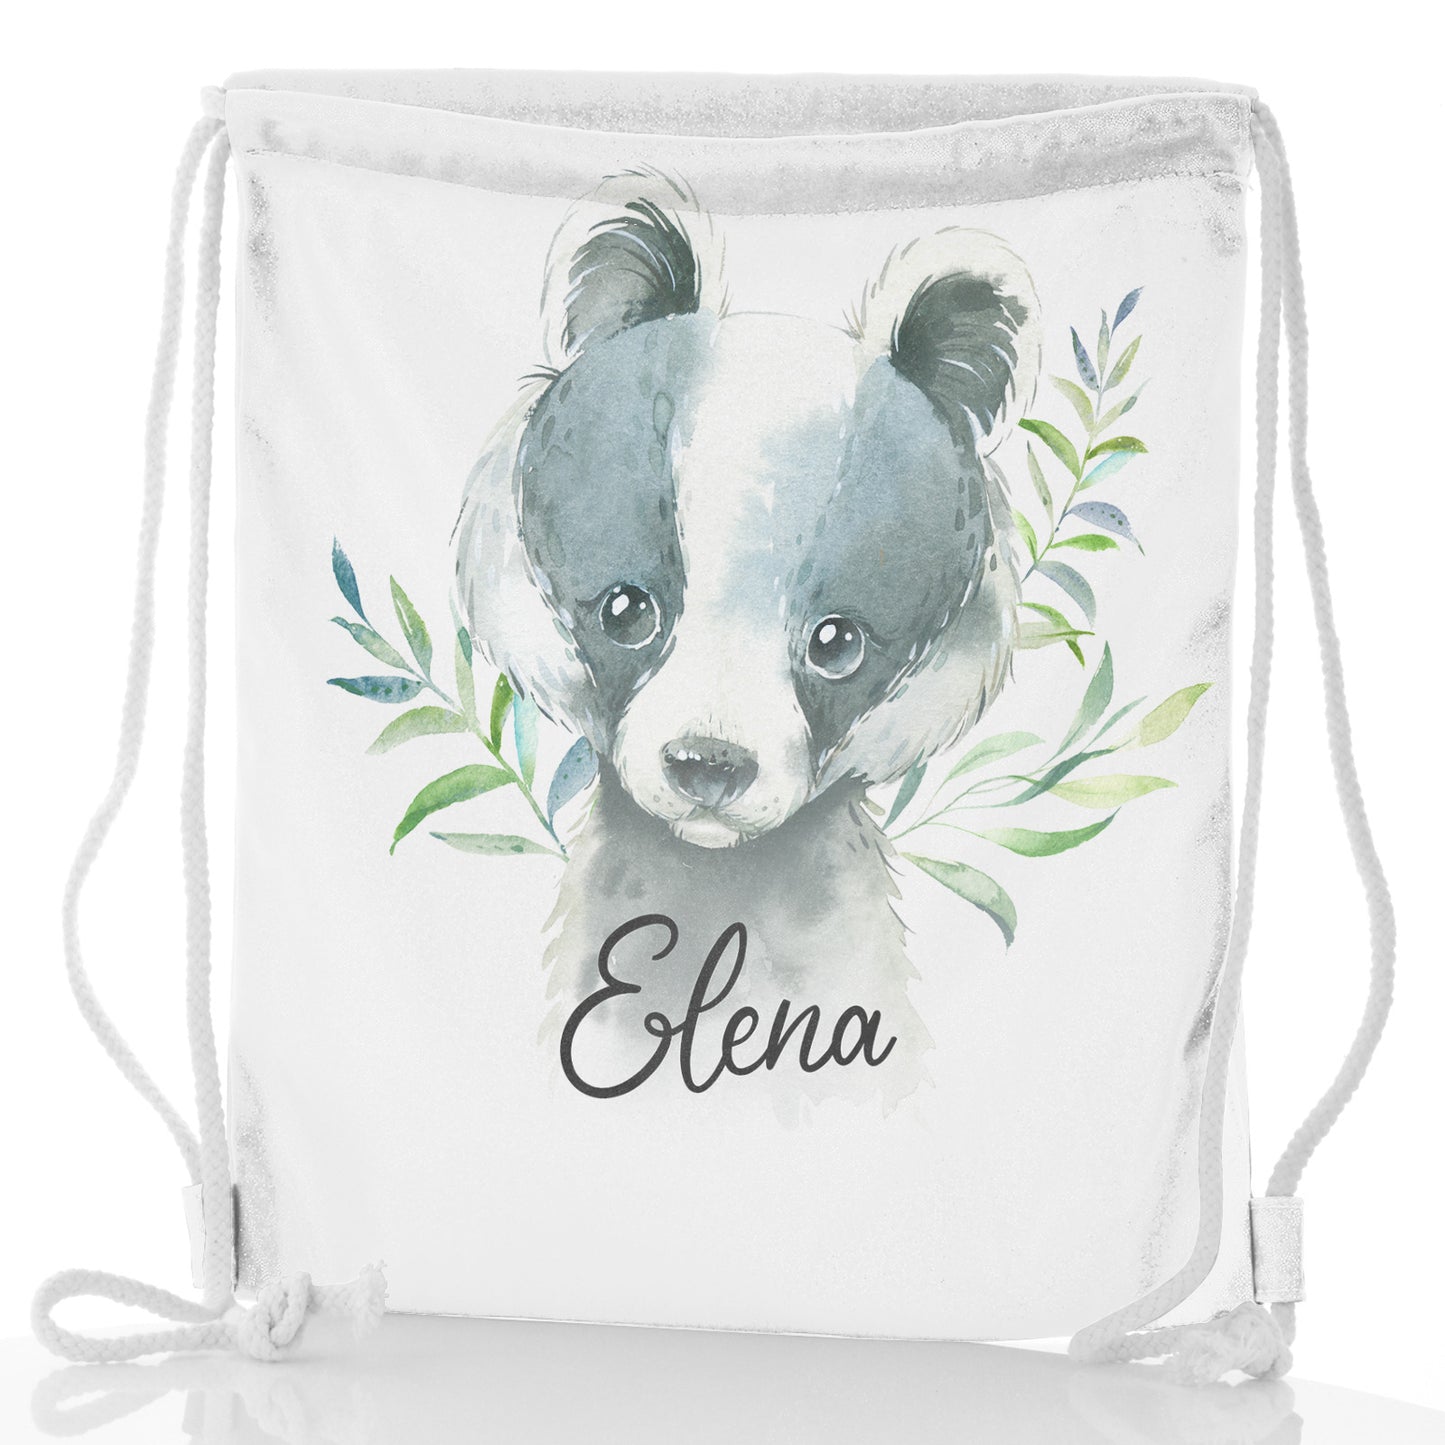 Personalised Glitter Drawstring Backpack with Black and White Badger Leaves and Cute Text